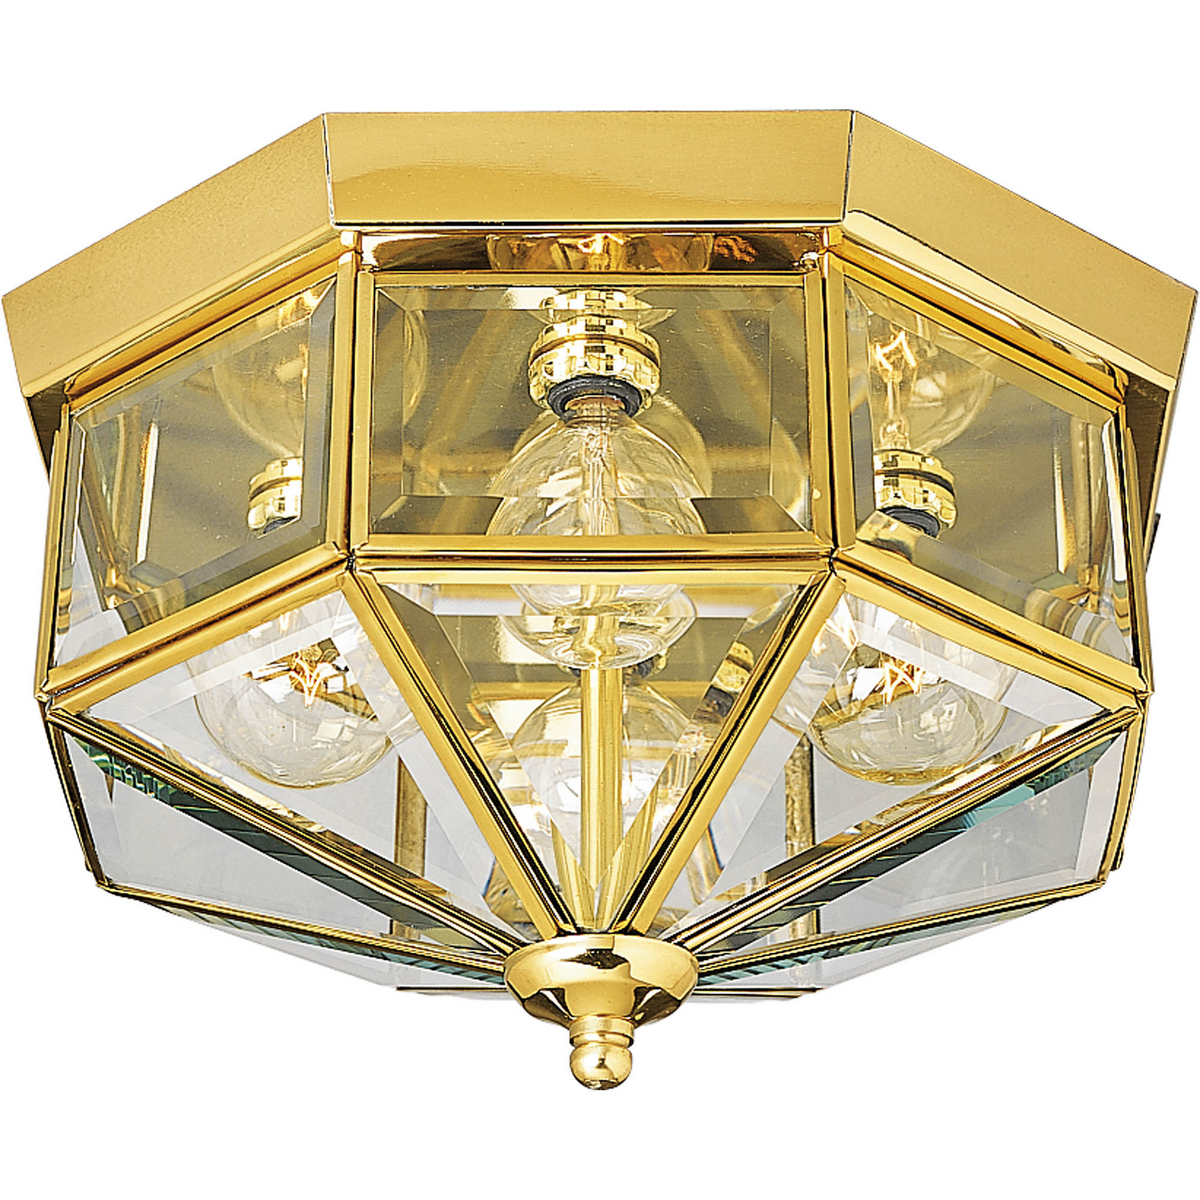 Four-light octagonal close-to-ceiling fixture with clear, bound beveled glass. Solid brass construction. G-lamps recommended. Traditional styling perfect for halls, closets, porches, laundry rooms, bedroom. Polished Brass finish.